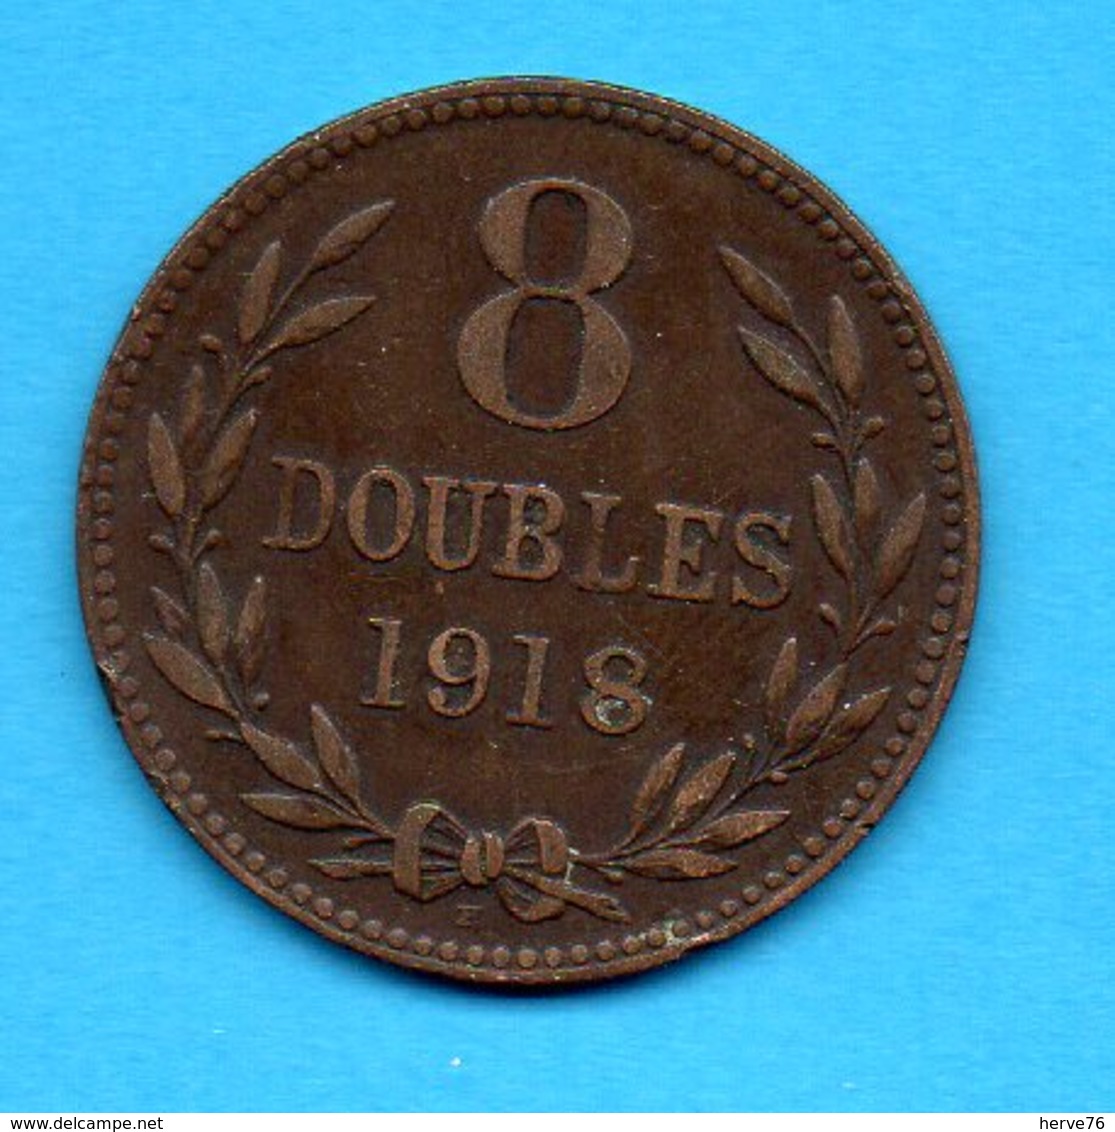 GUERNESEY - GUERNSEY - Pièce 8 Doubles 1918 - Guernsey